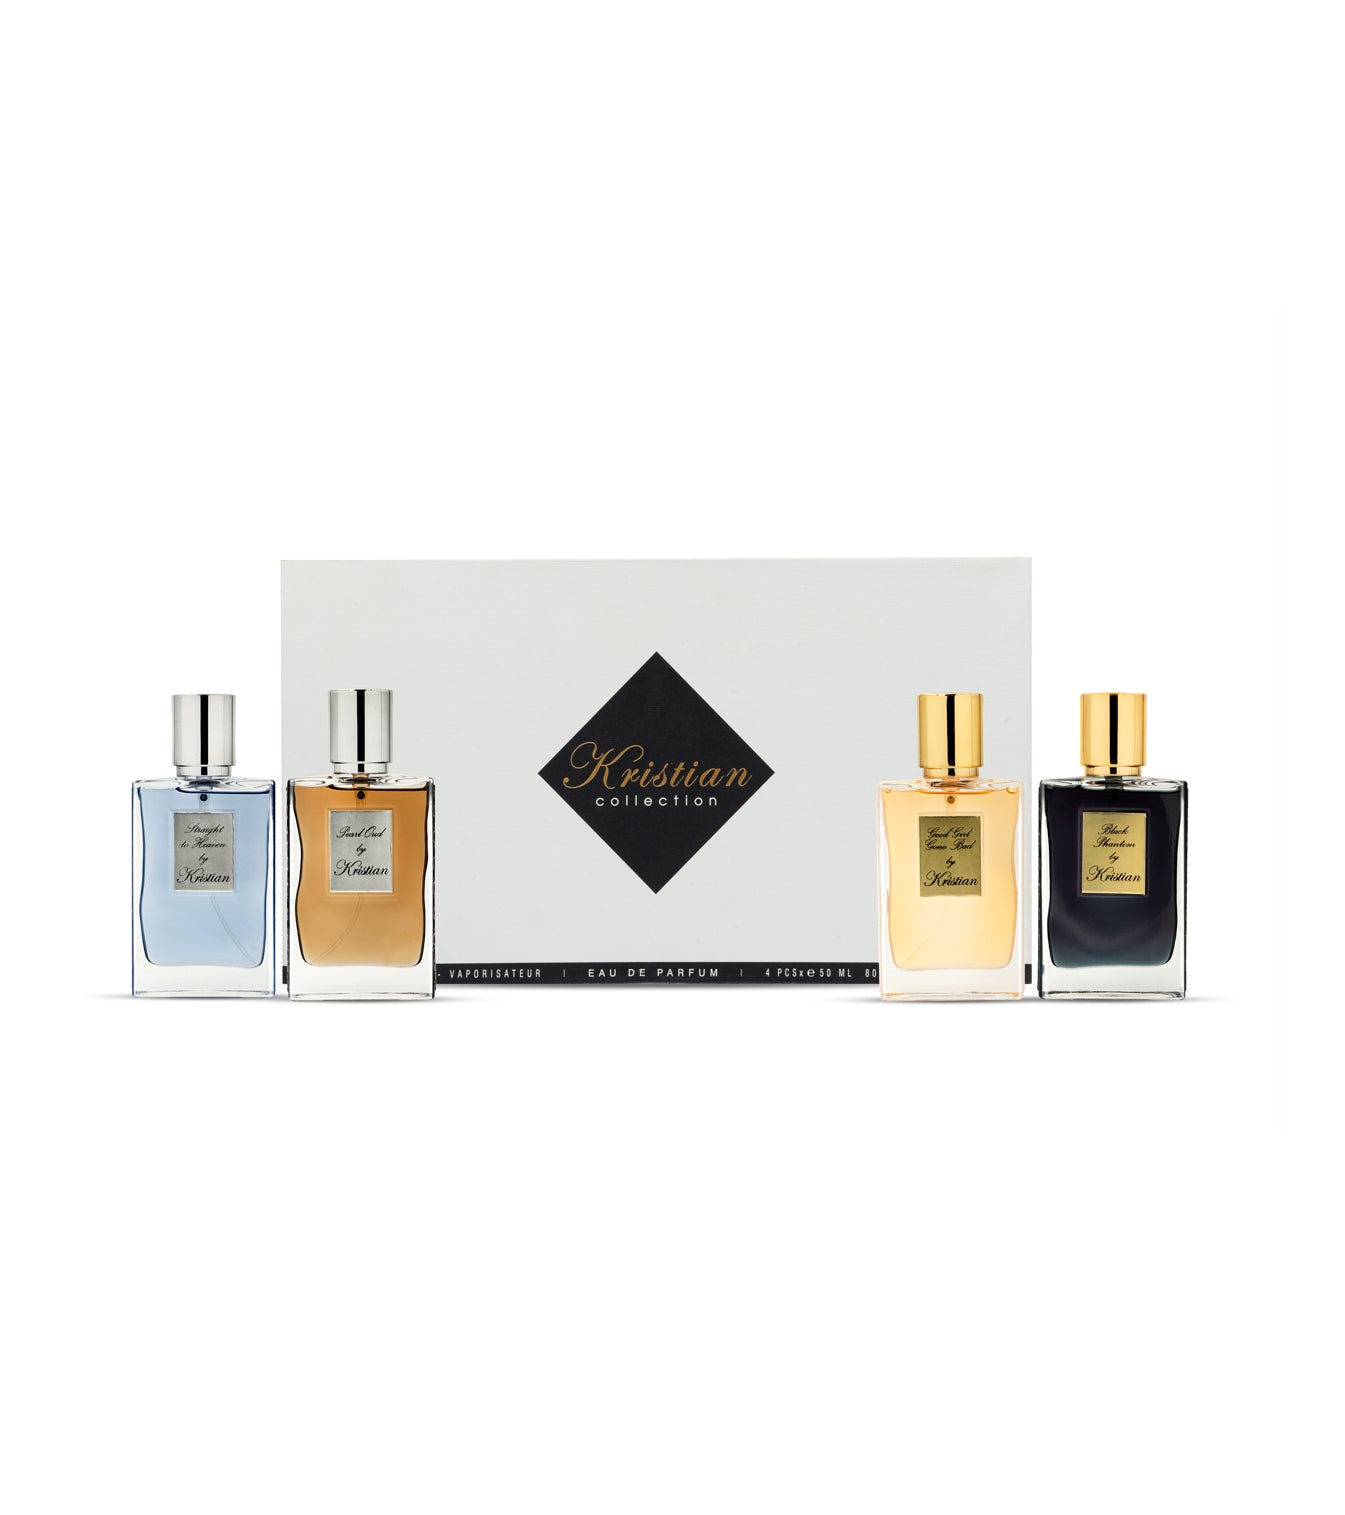 KRISTIAN COLLECTION 50 ML GIFTSET